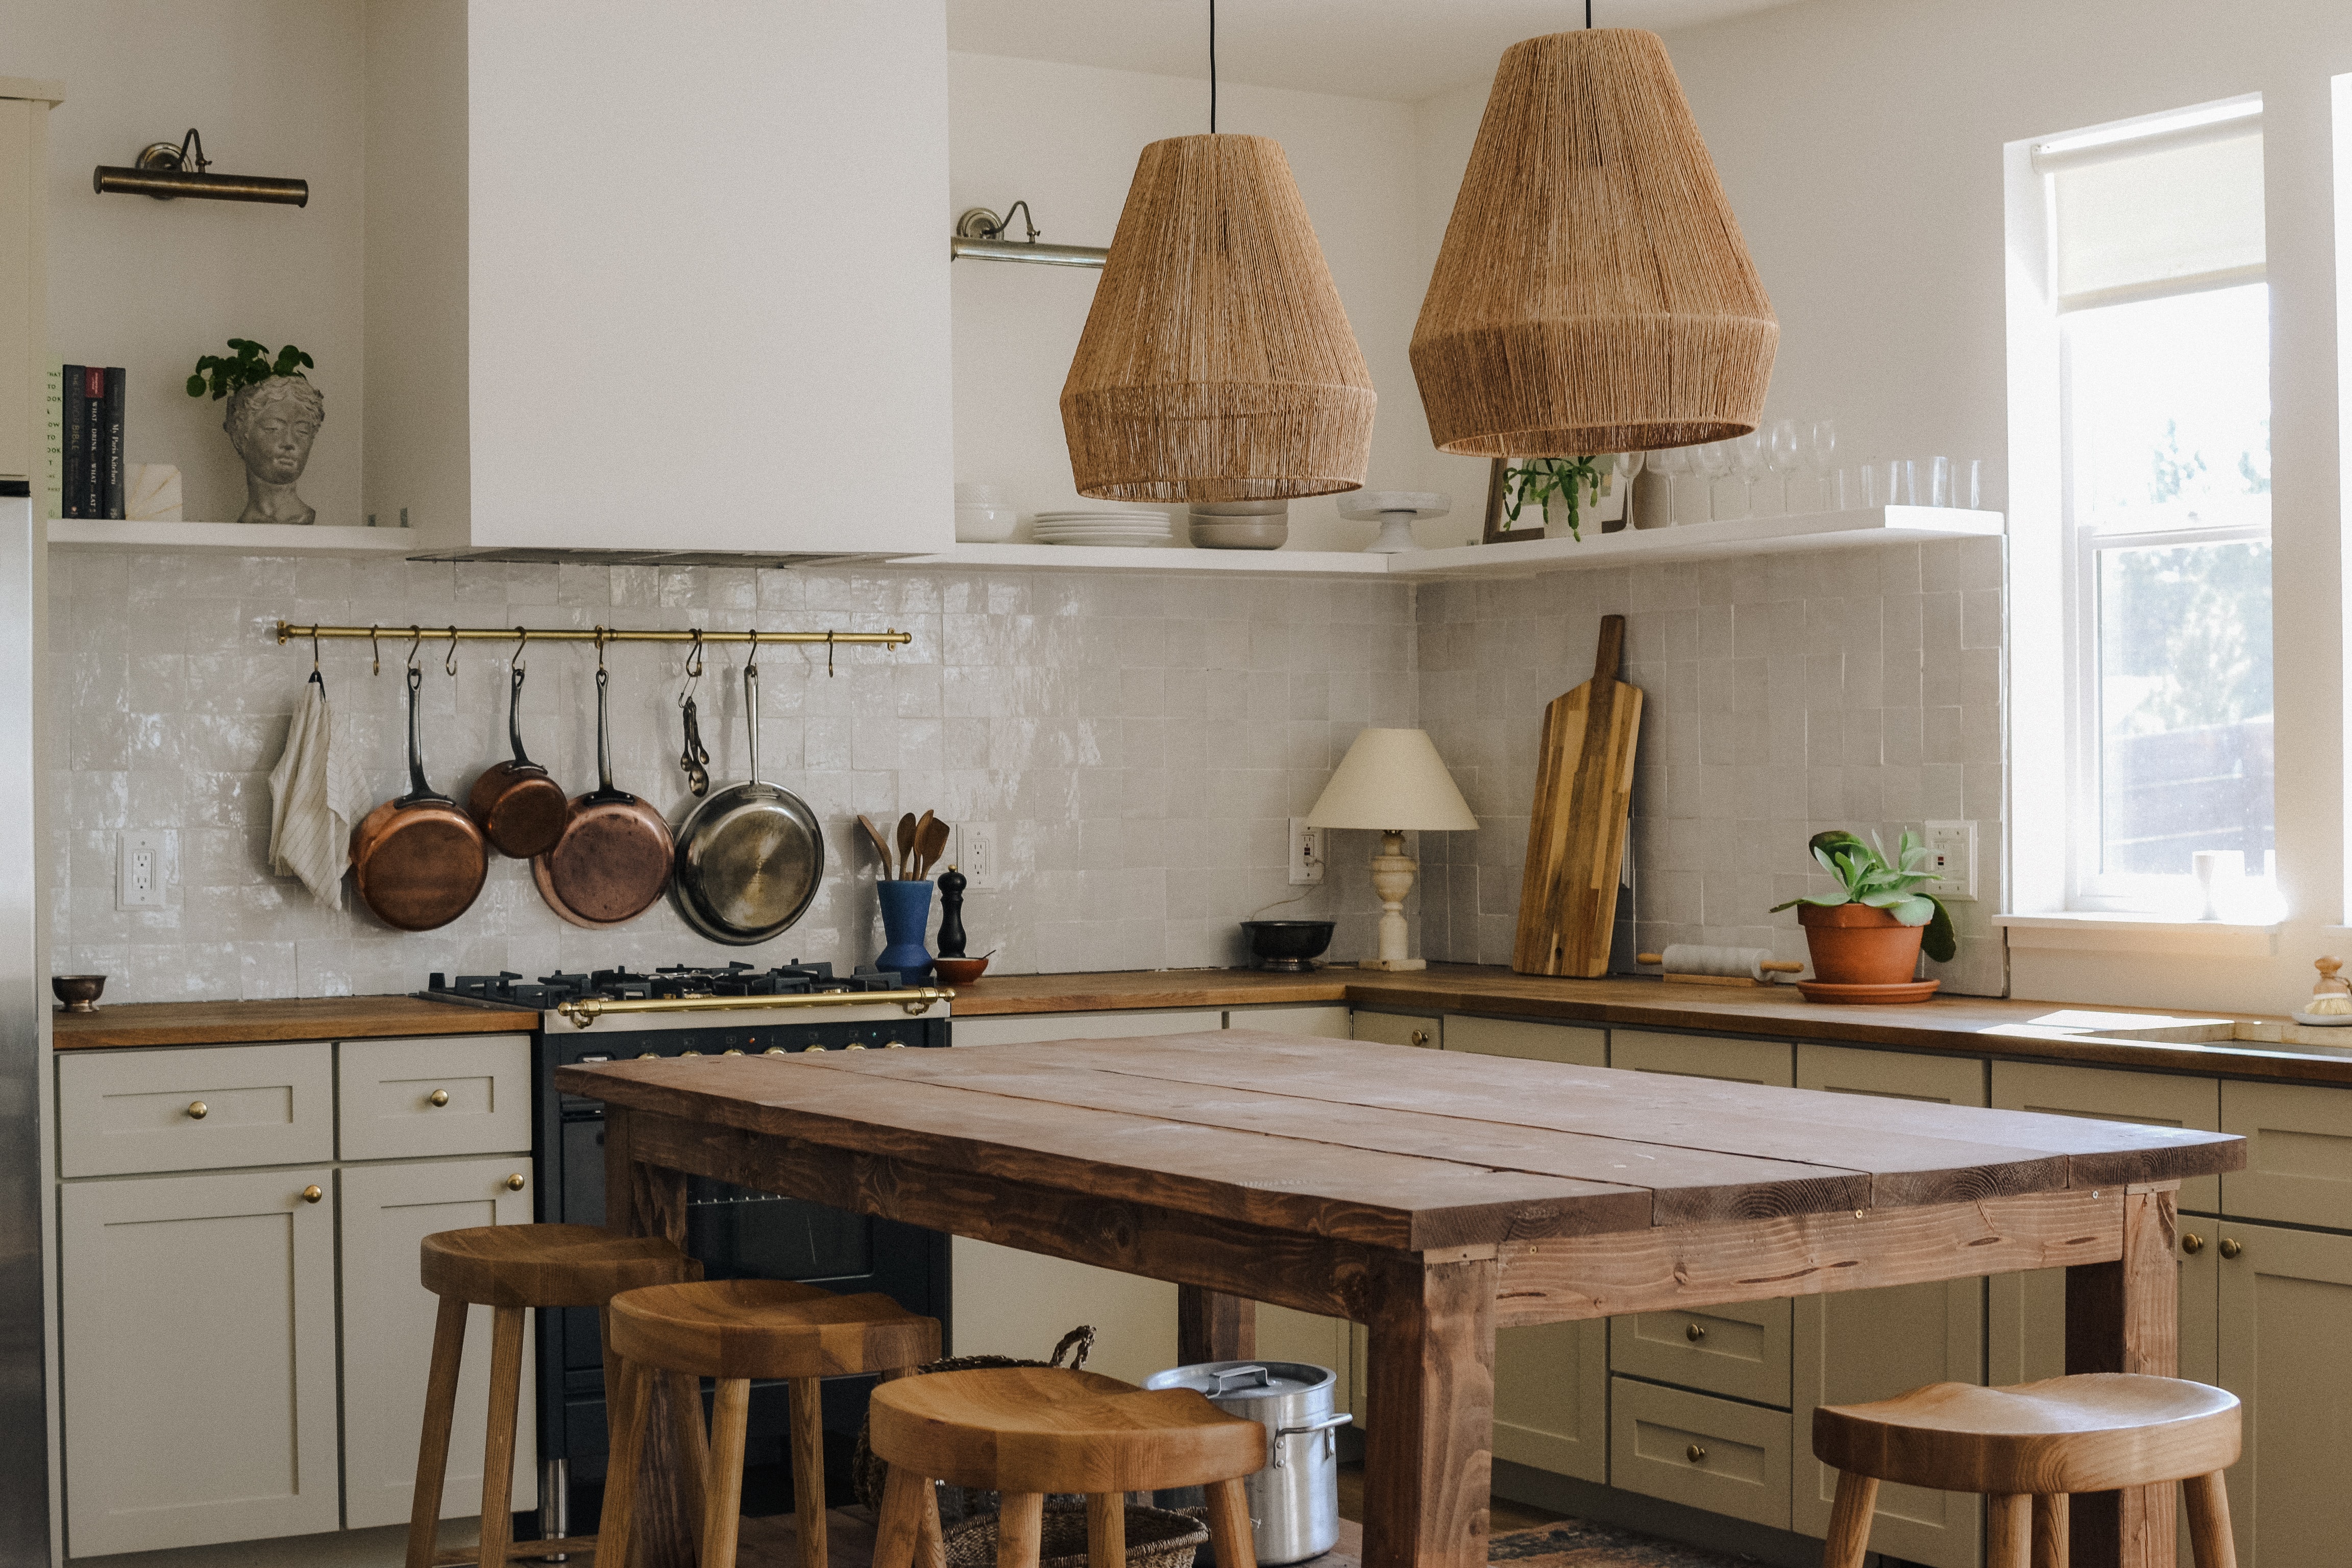 A woodsy-themed kitchen.